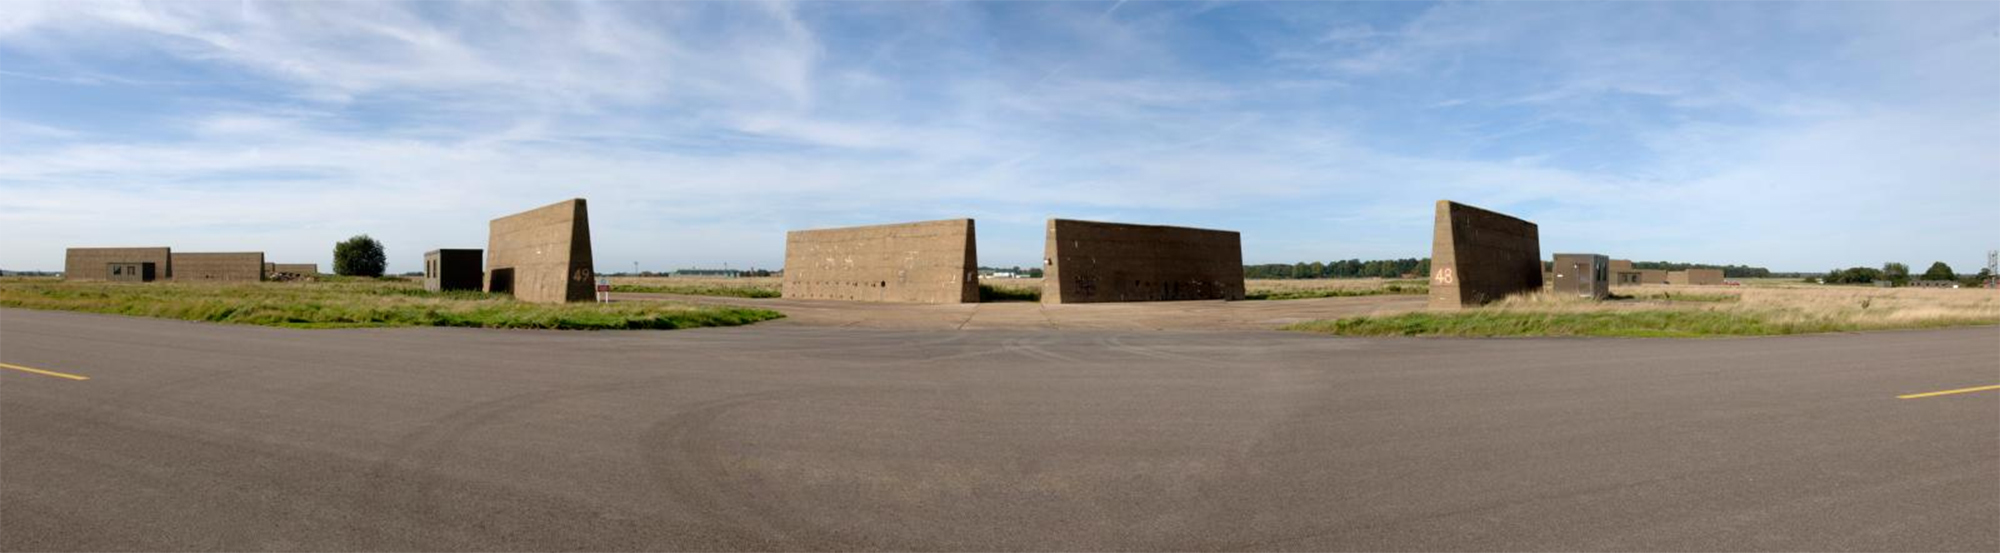 RAF Coltishall, Suffolk, mid 1950s concrete blast walls to protect aircraft from low level attacks